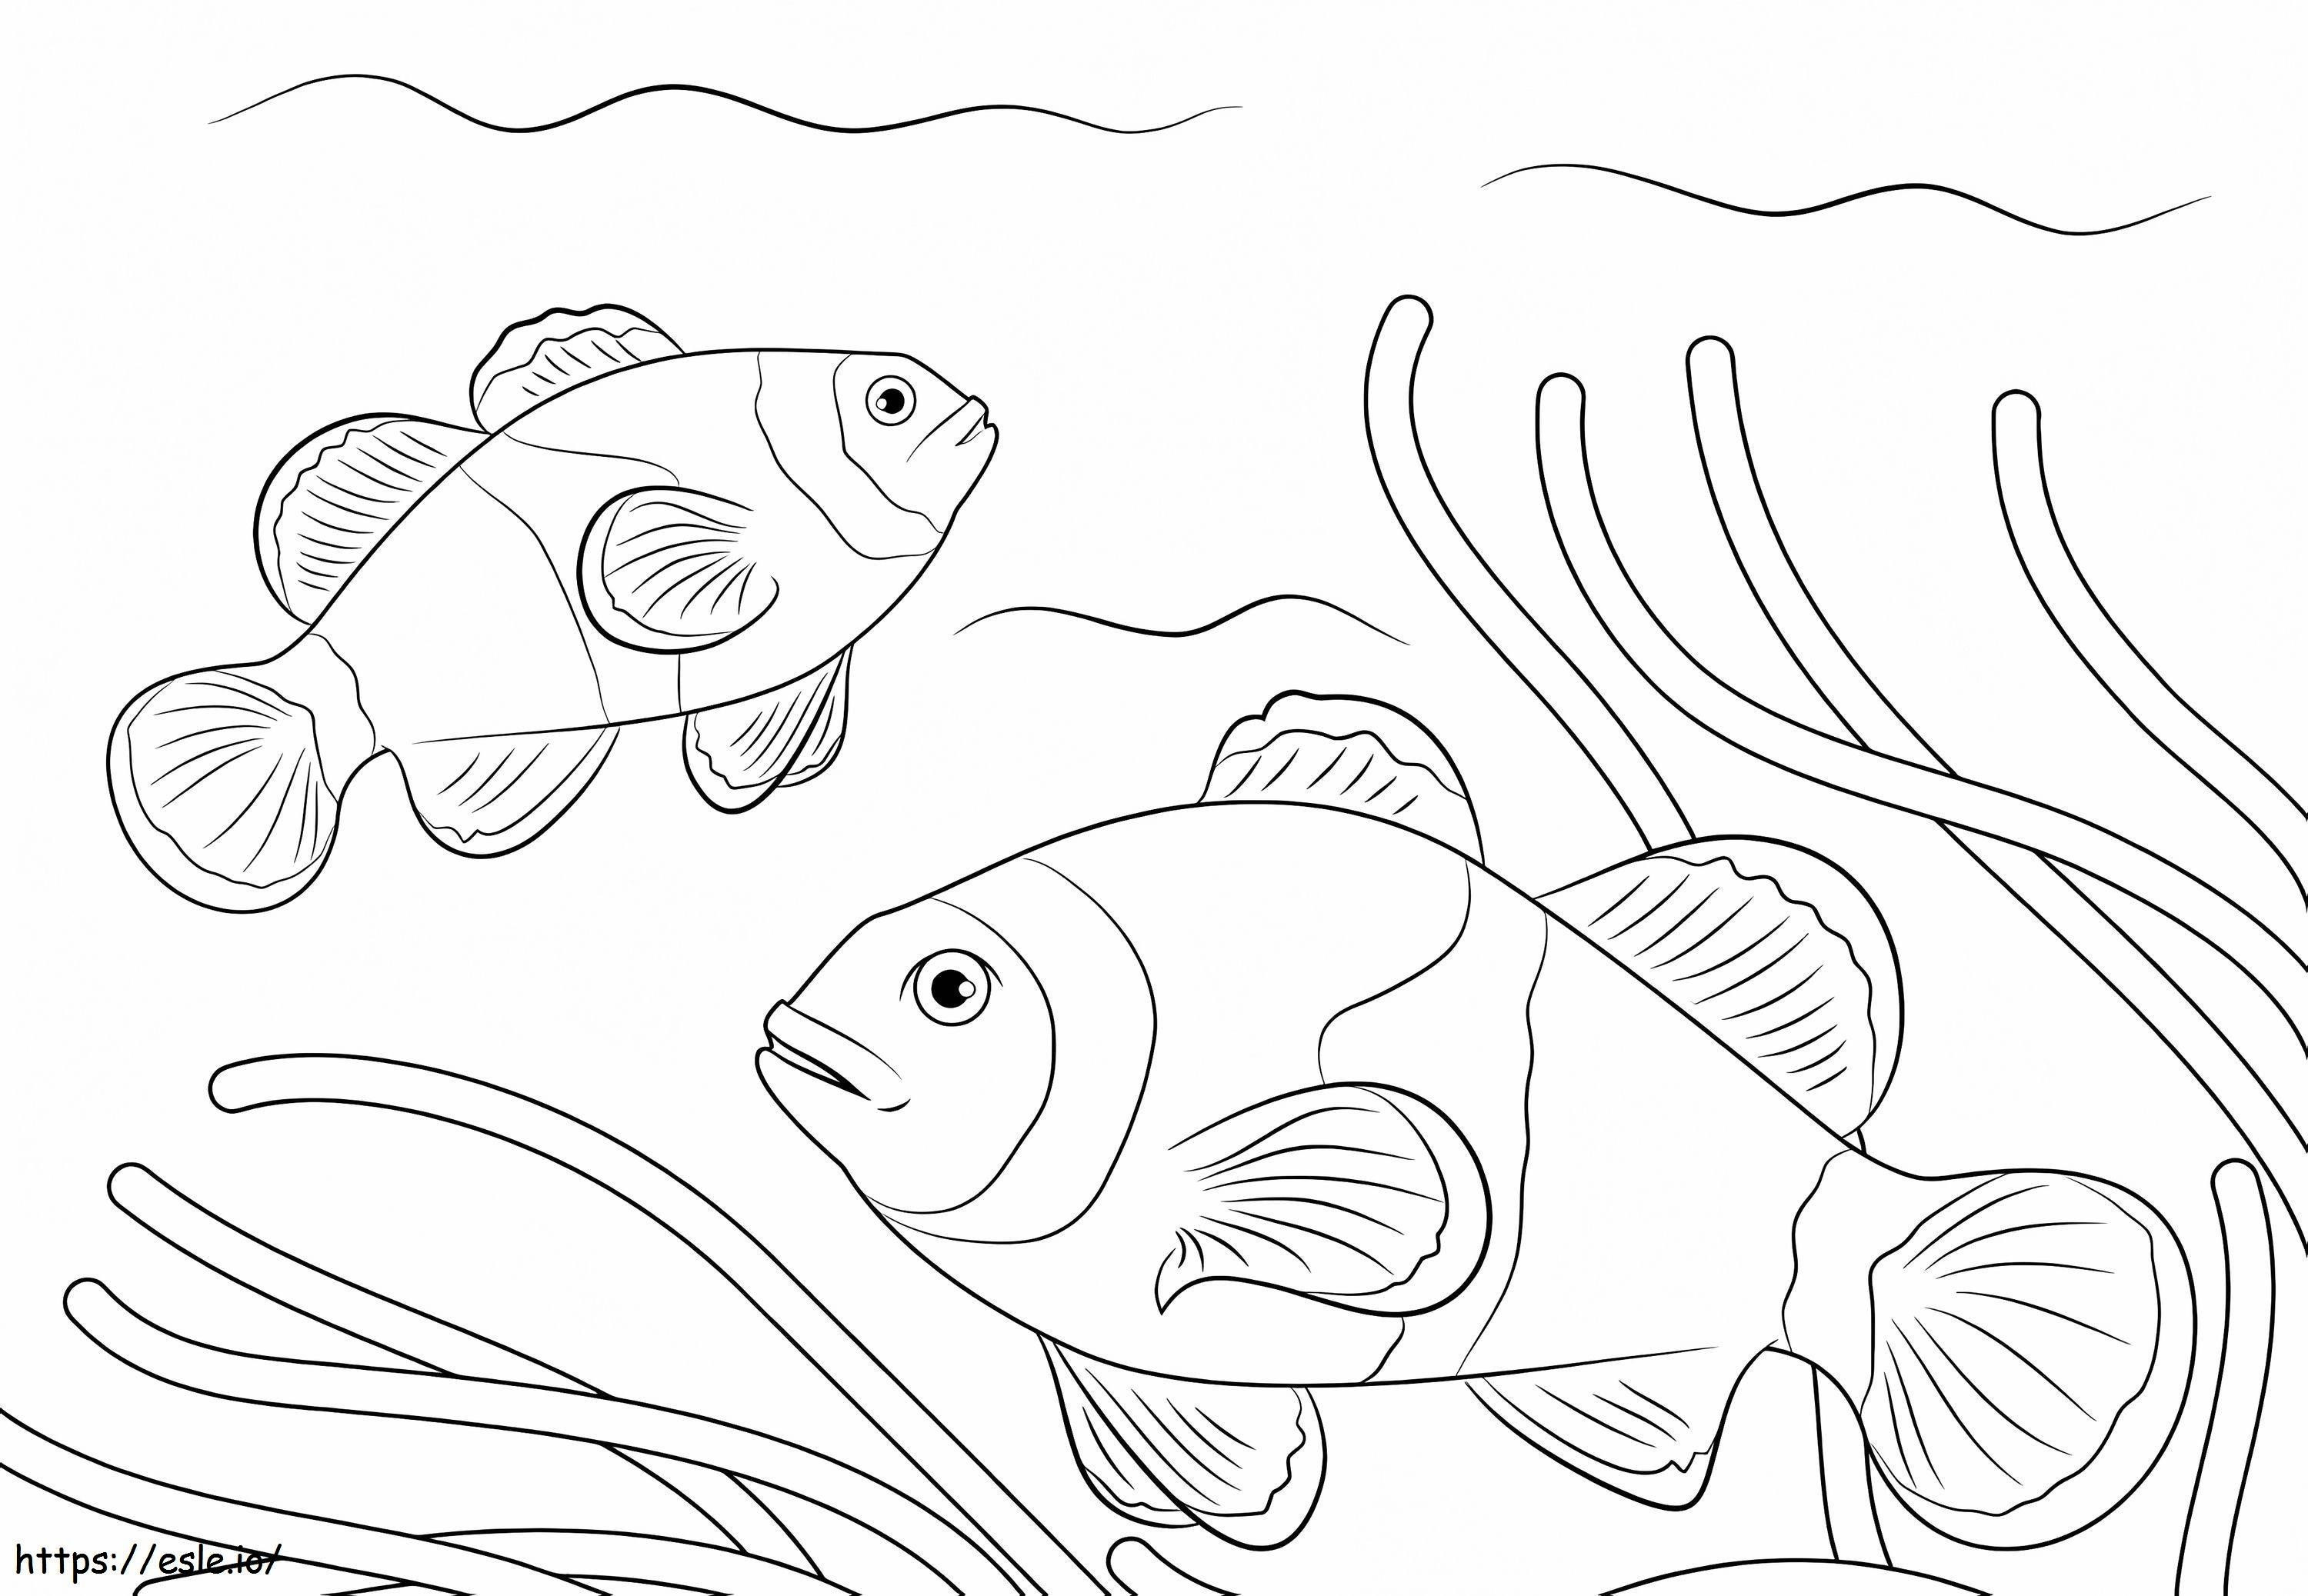 Ocellaris Clownfishes 1 coloring page